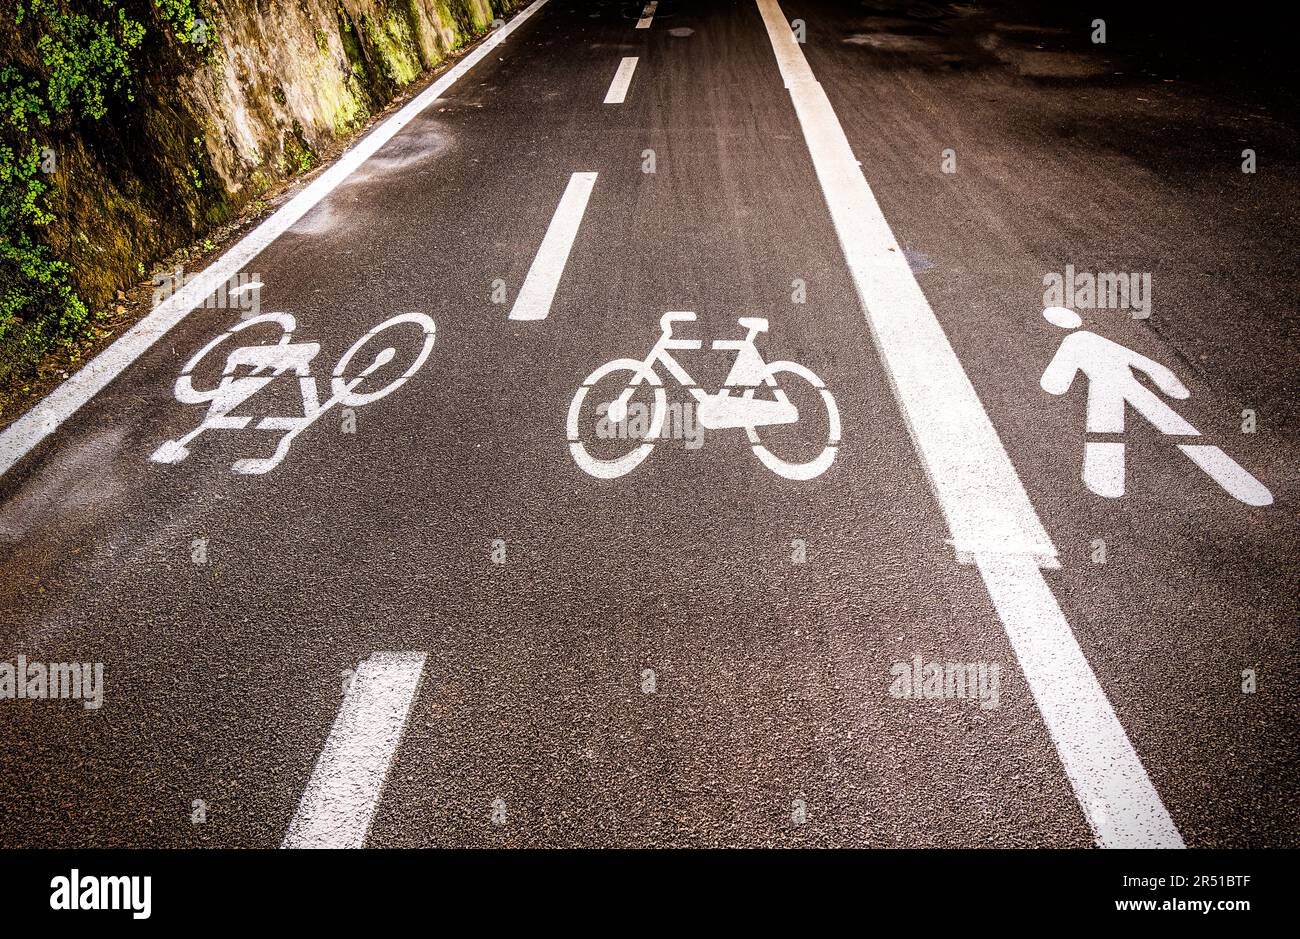 Bicycle and person sign on asphalt, Liguria Italy Stock Photo